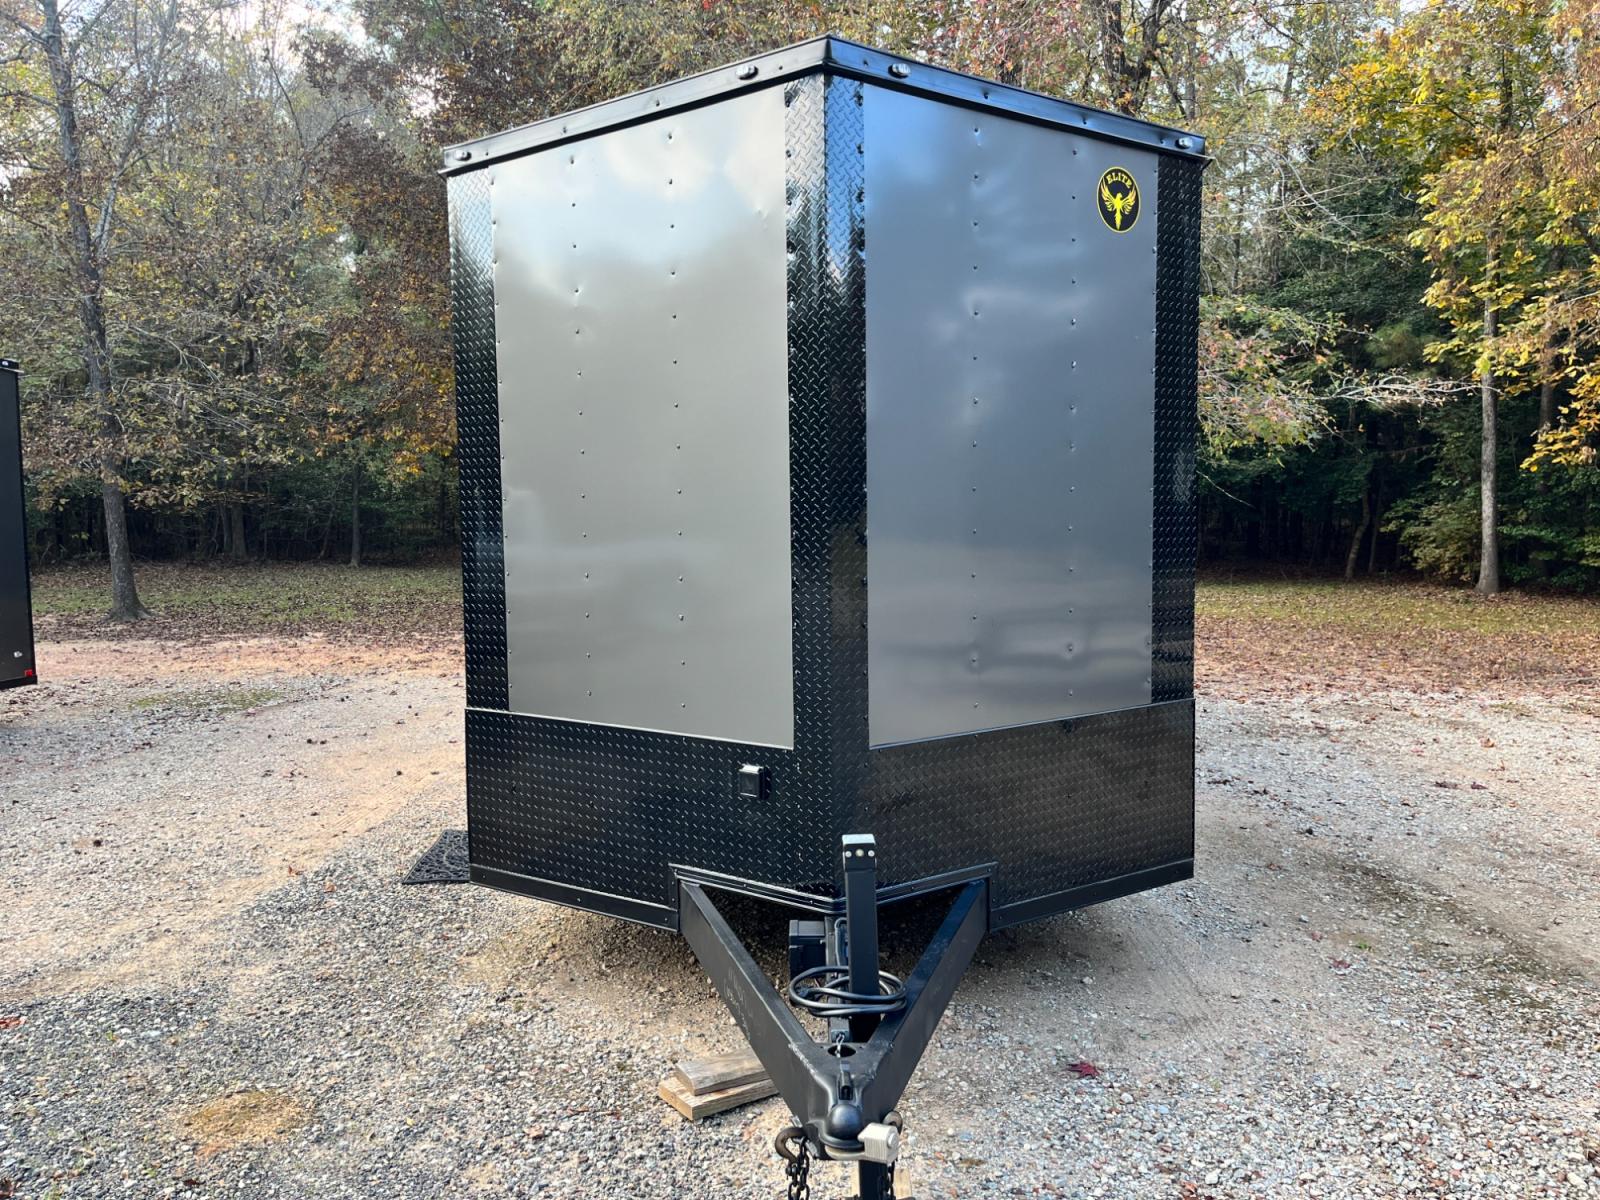 2023 .080 Charcoal Metallic w/Black Out Pkg. Elite Cargo 8.5ft X 24ft Tandem , located at 1330 Rainey Rd., Macon, 31220, (478) 960-1044, 32.845638, -83.778687 - Brand New 2023 Model Elite Cargo Trailer, Made Tifton, GA 7ft 4" Tall Inside Height, Air Conditioner, Insulated too! 15,500 BTU A/C Unit, 5 Inside LED Light Strips! Lights Up Really Bright Inside! This Deluxe Enclosed Car Hauler has Awesome Features! .080 Thick Charcoal Metallic Skin! Stunning - Photo #3